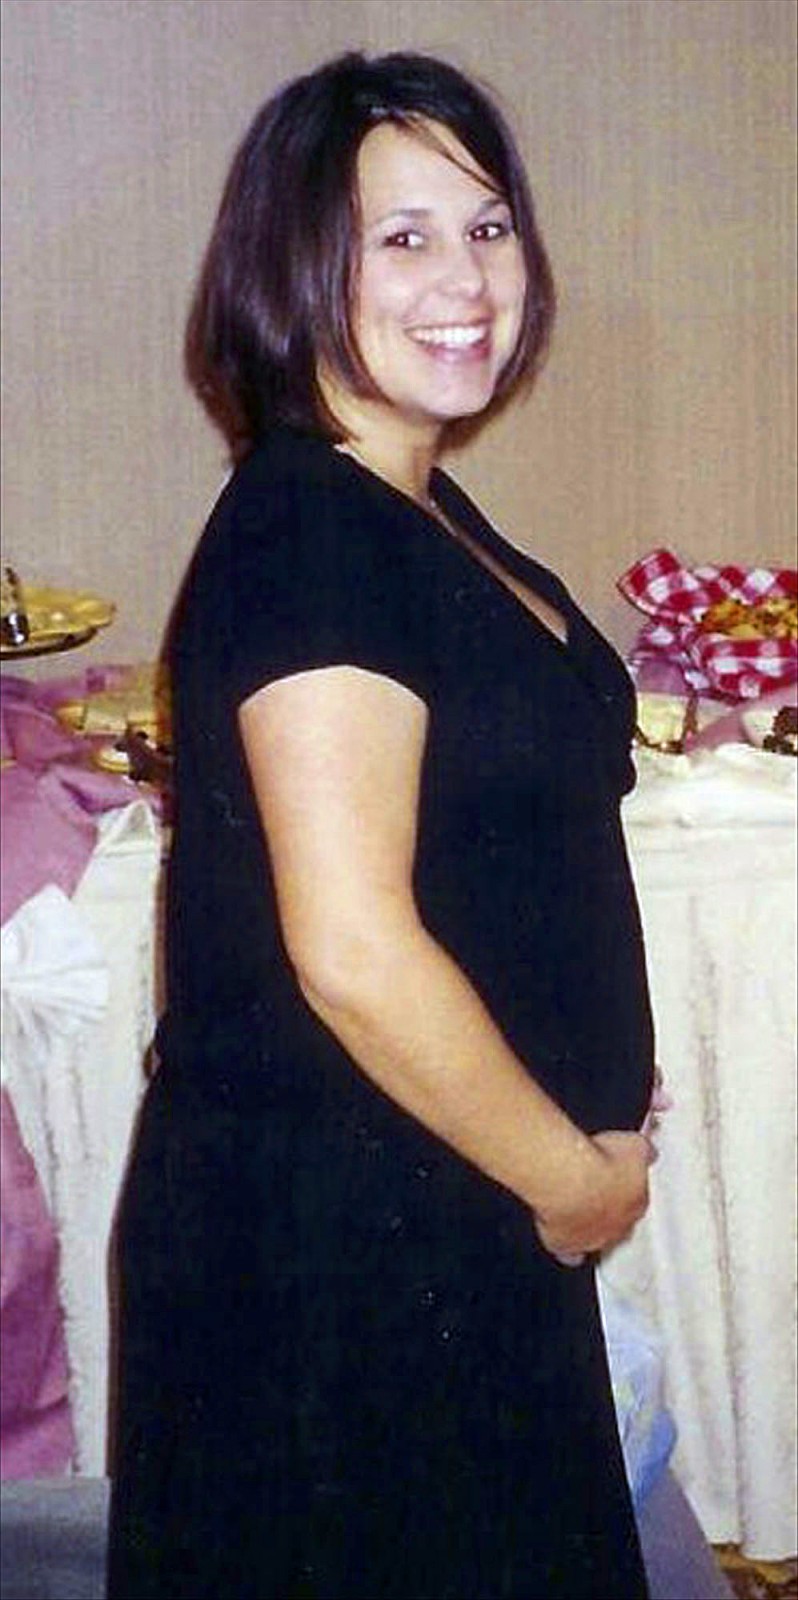 In late December of 2002, the world has gotten to know a woman who we later found out was already dead at the time. Laci Peterson was 8 months pregnant by her husband who later would be found guilty for her murder. Her blood type was O negative. RIP.